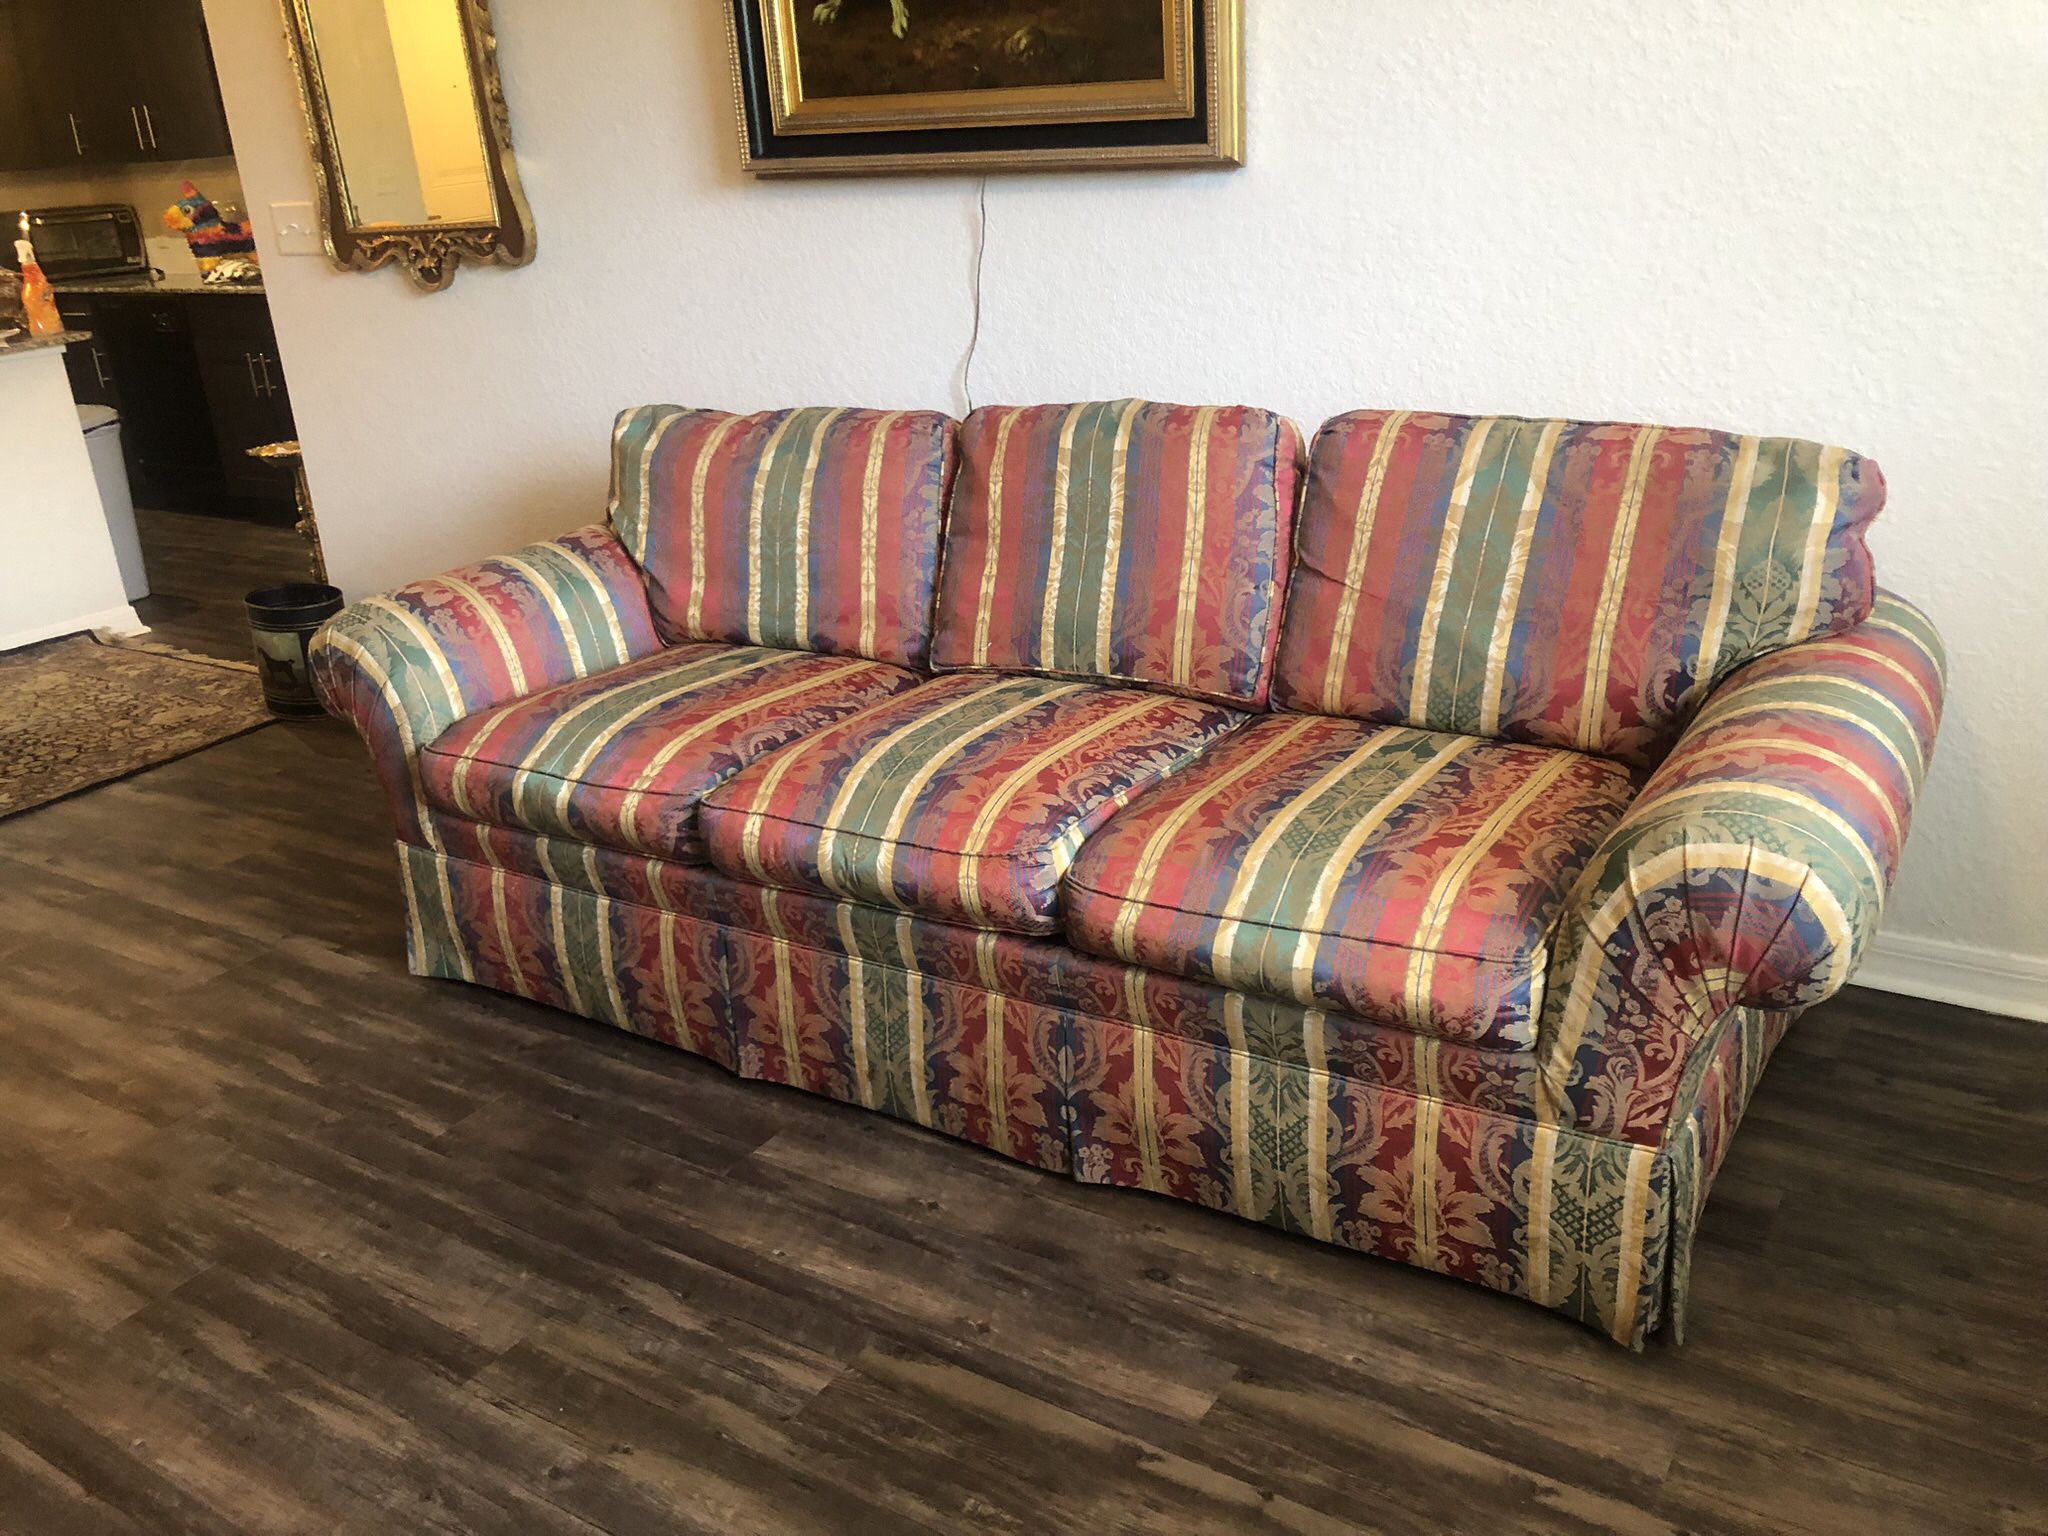 Great Decorative Couch